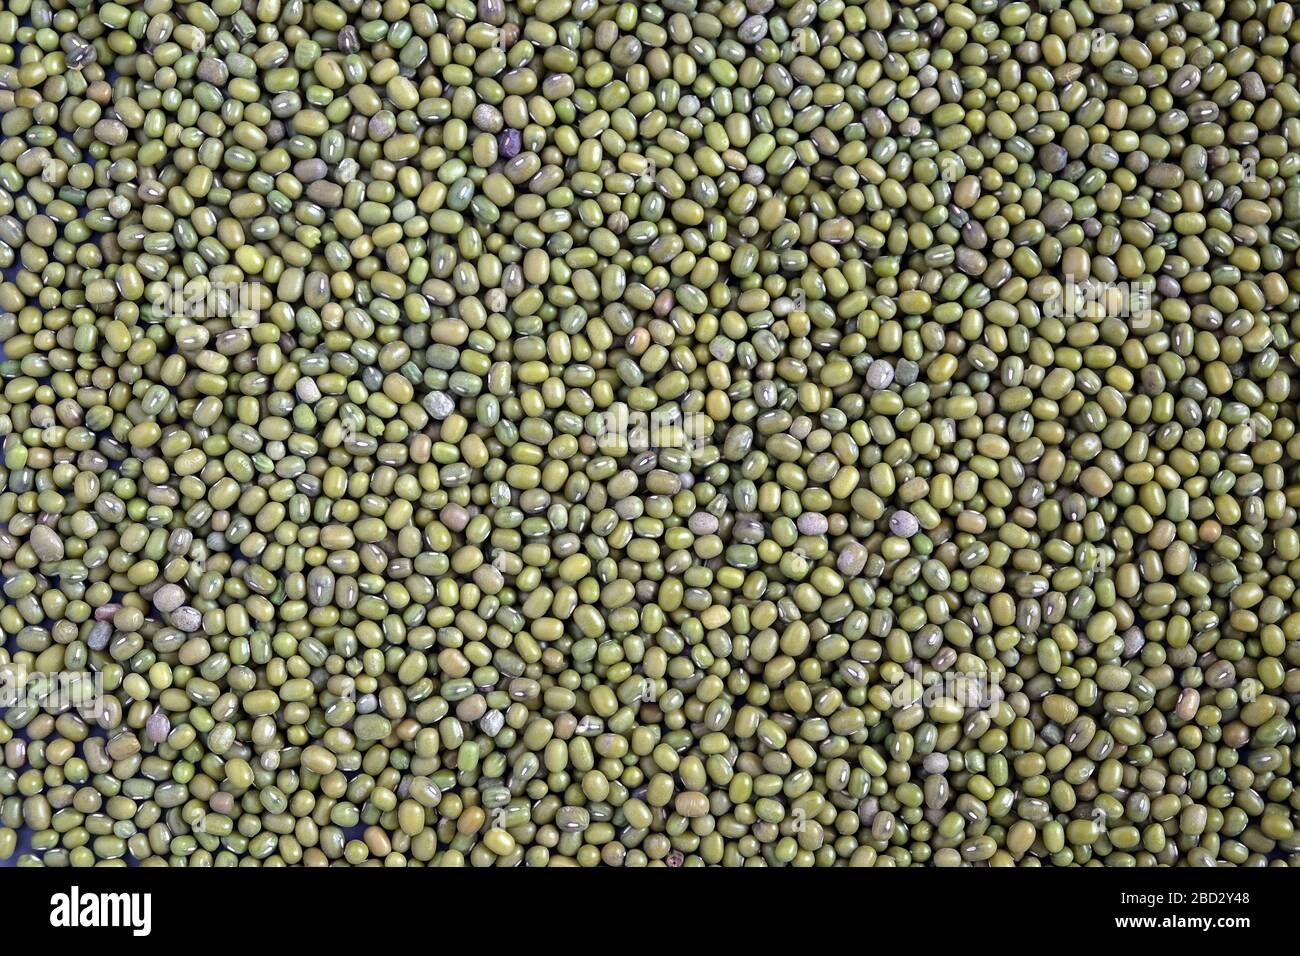 Food supplies. Crop of many dry green lentil grains on flat surface as background top view close up Stock Photo